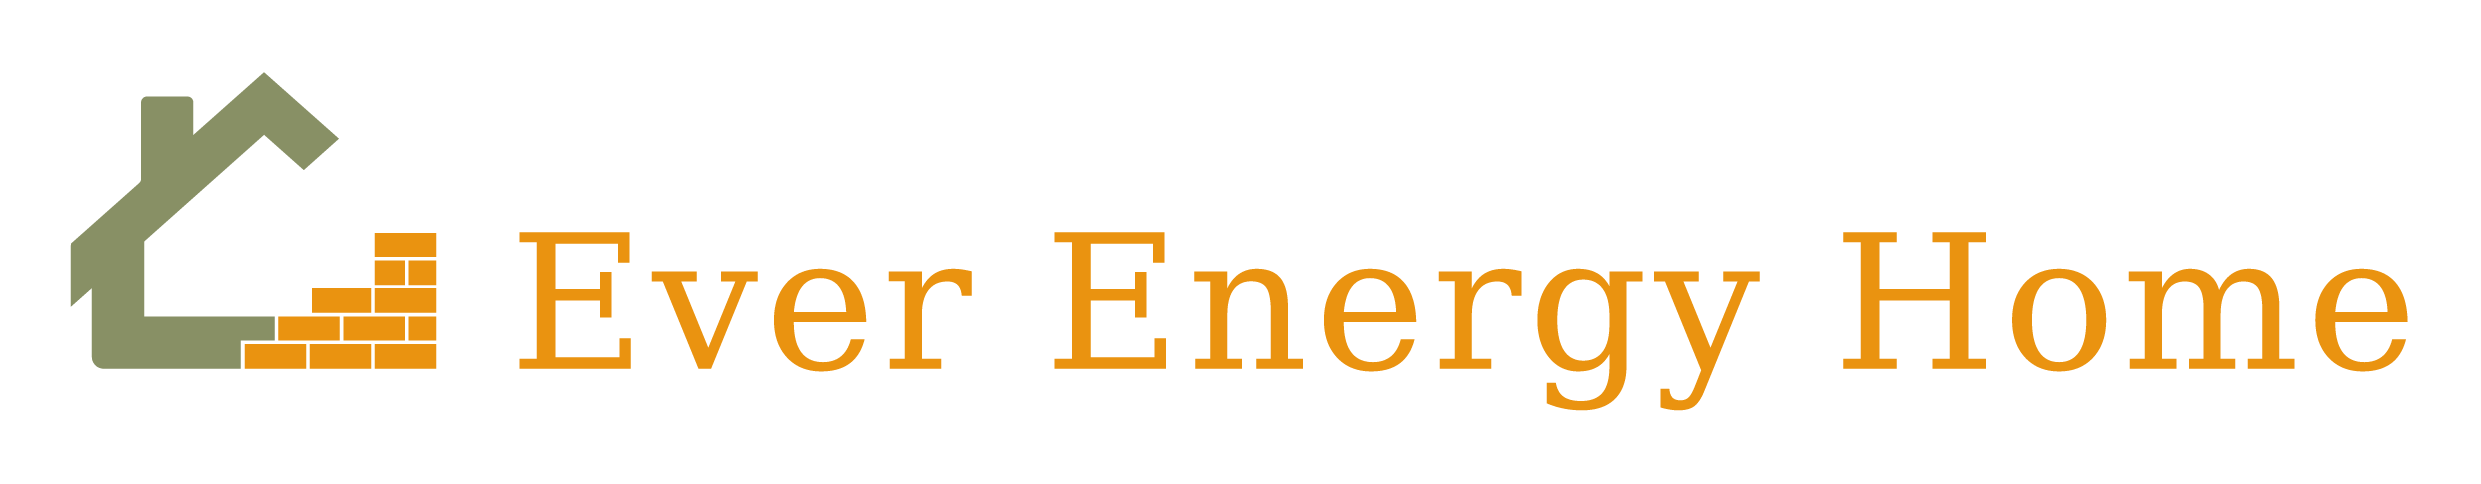 Ever Energy Group